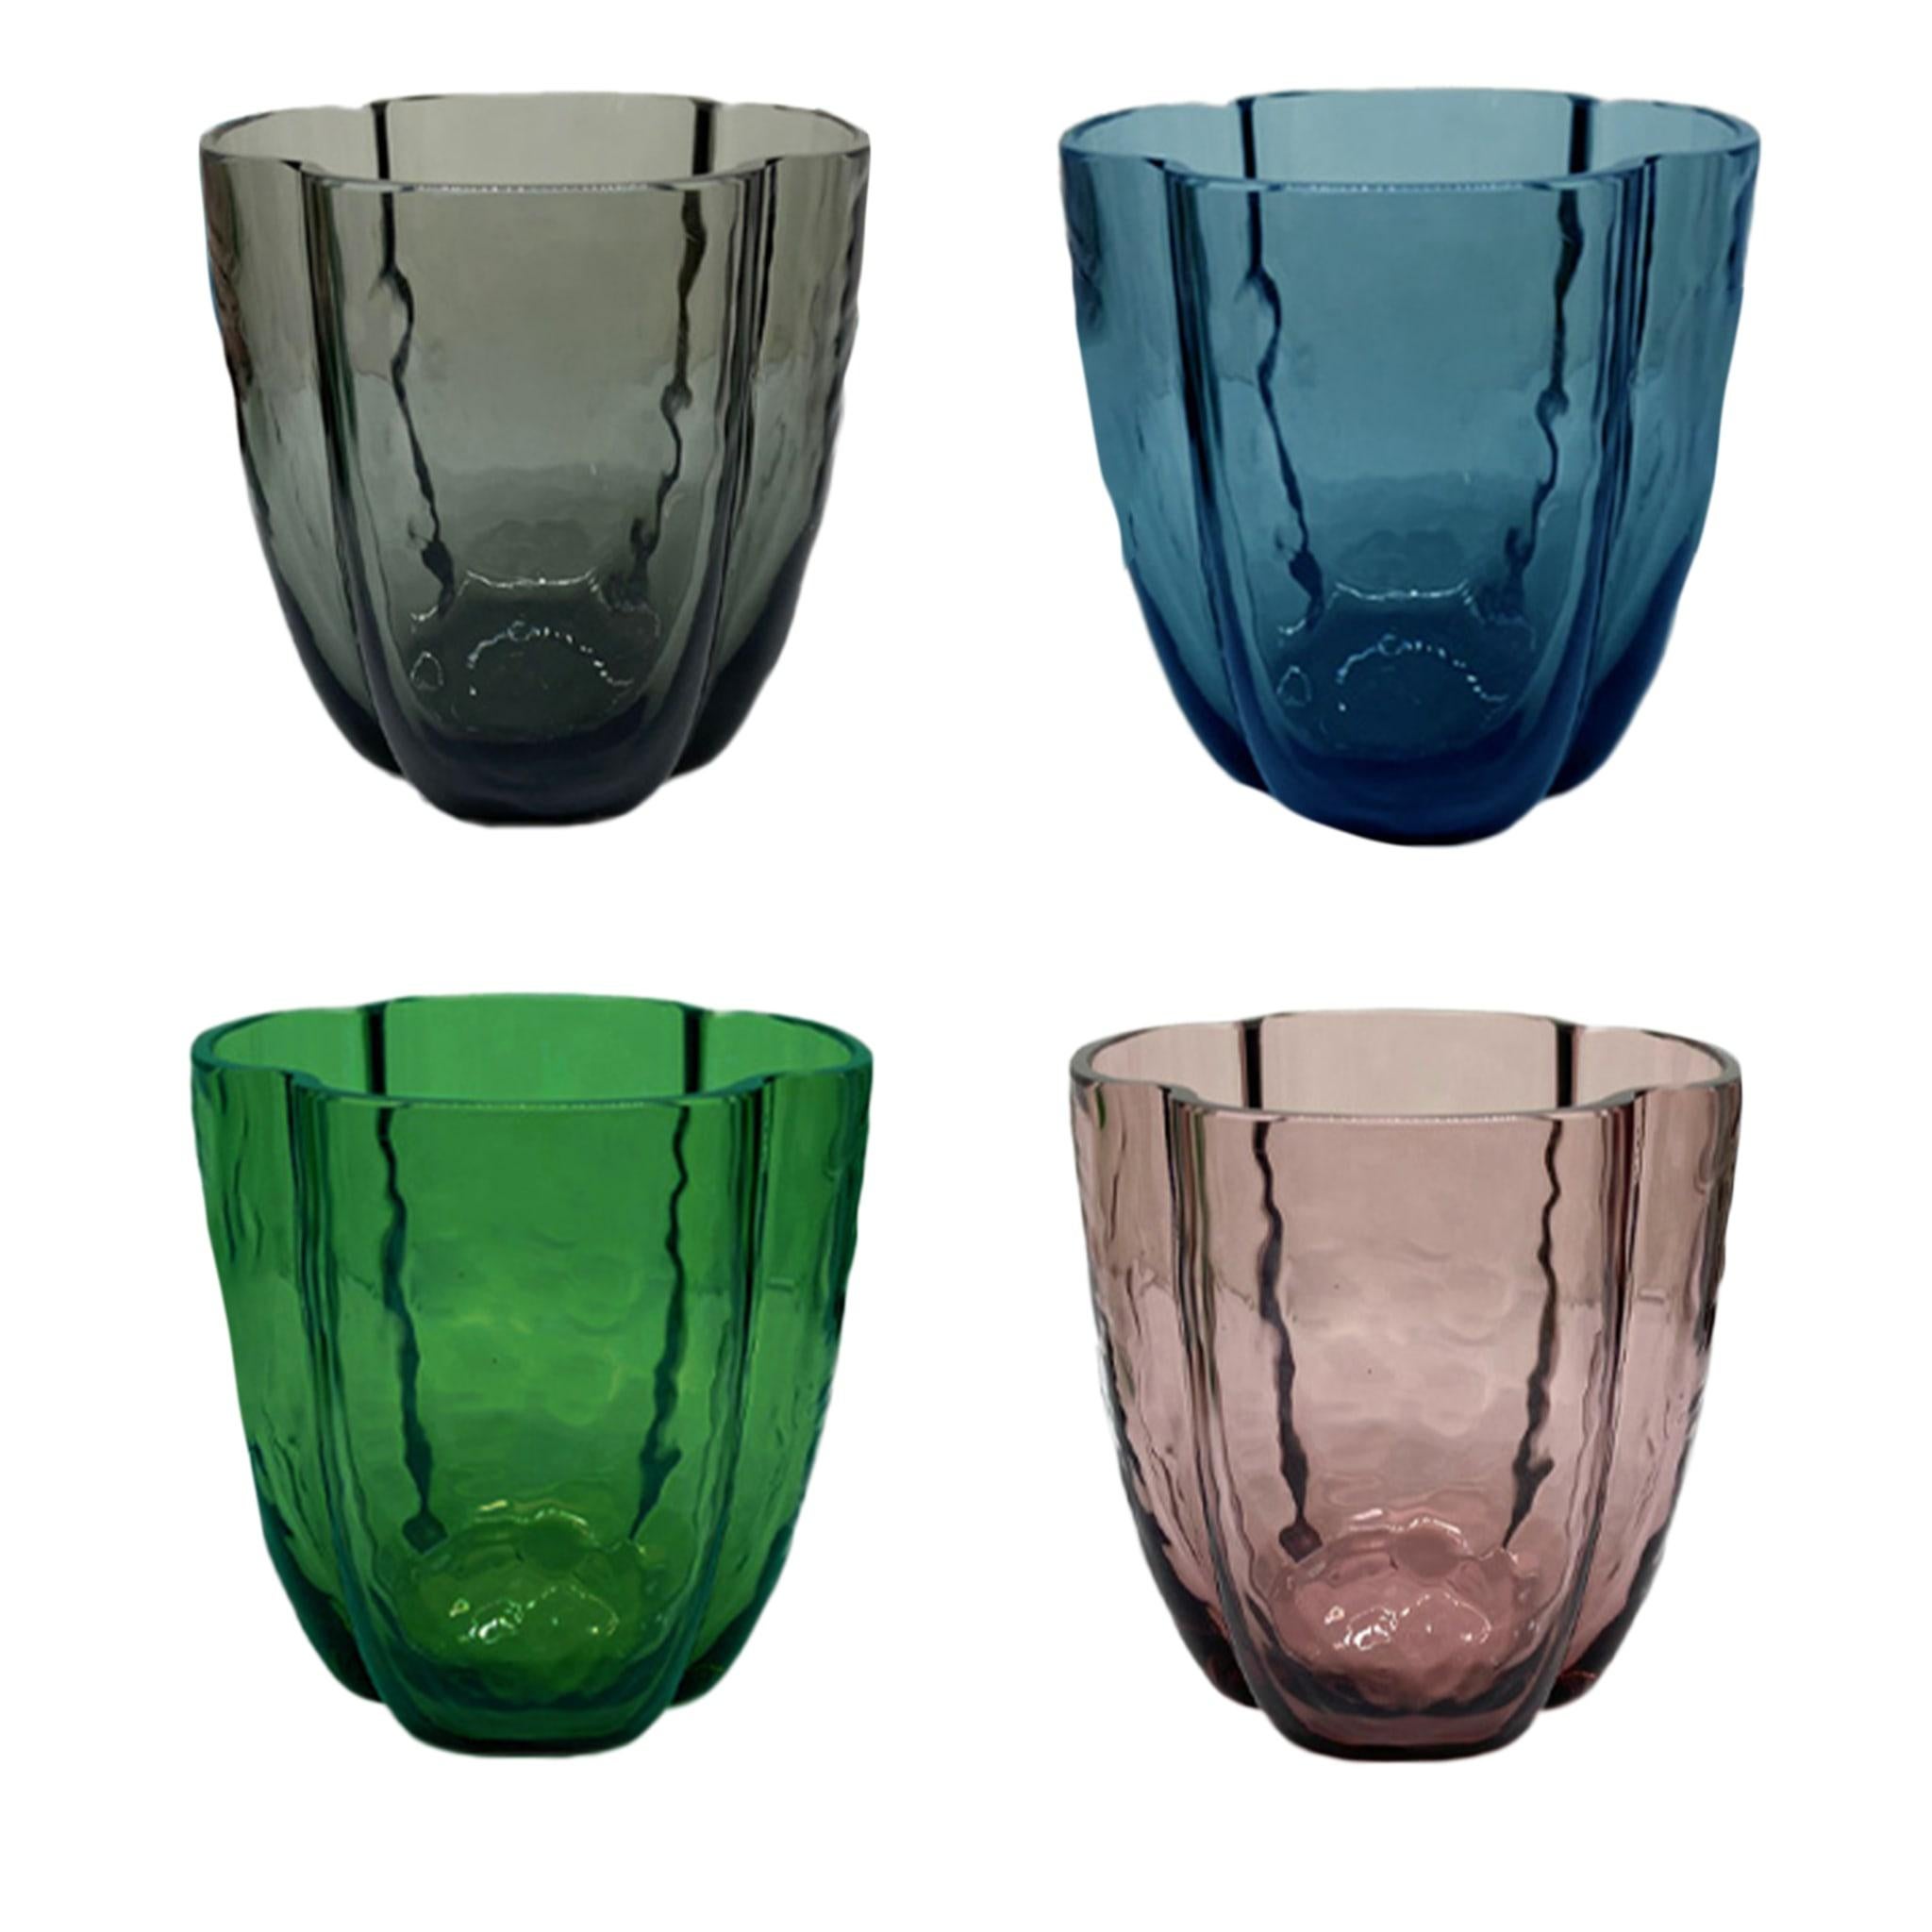 Set of 4 Murano glasses in four colors: green, aubergine, gray, and ocean blue. The Glass opens like a flower with four petals. The color of the glass is strong, and deep and gives intensity to each piece. Glasses are handmade in Murano following